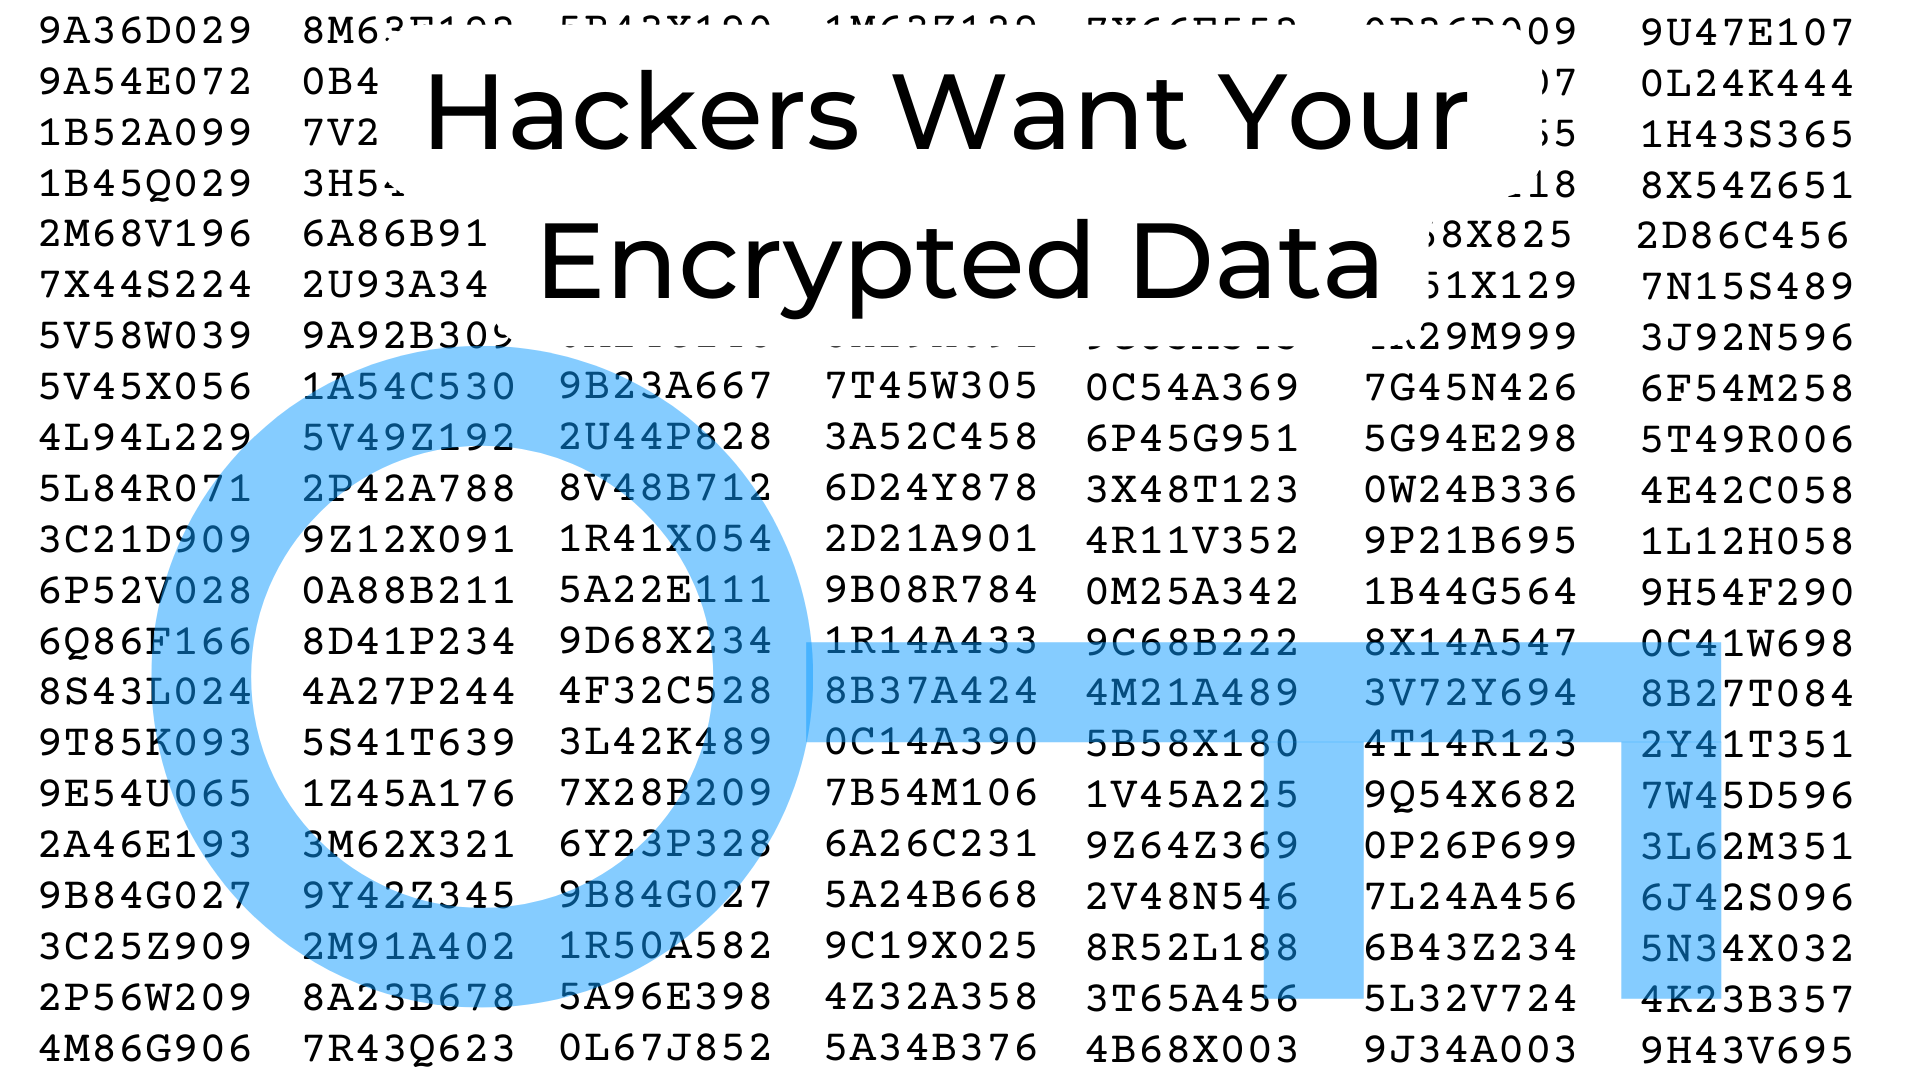 Hackers Want Your Encrypted Data